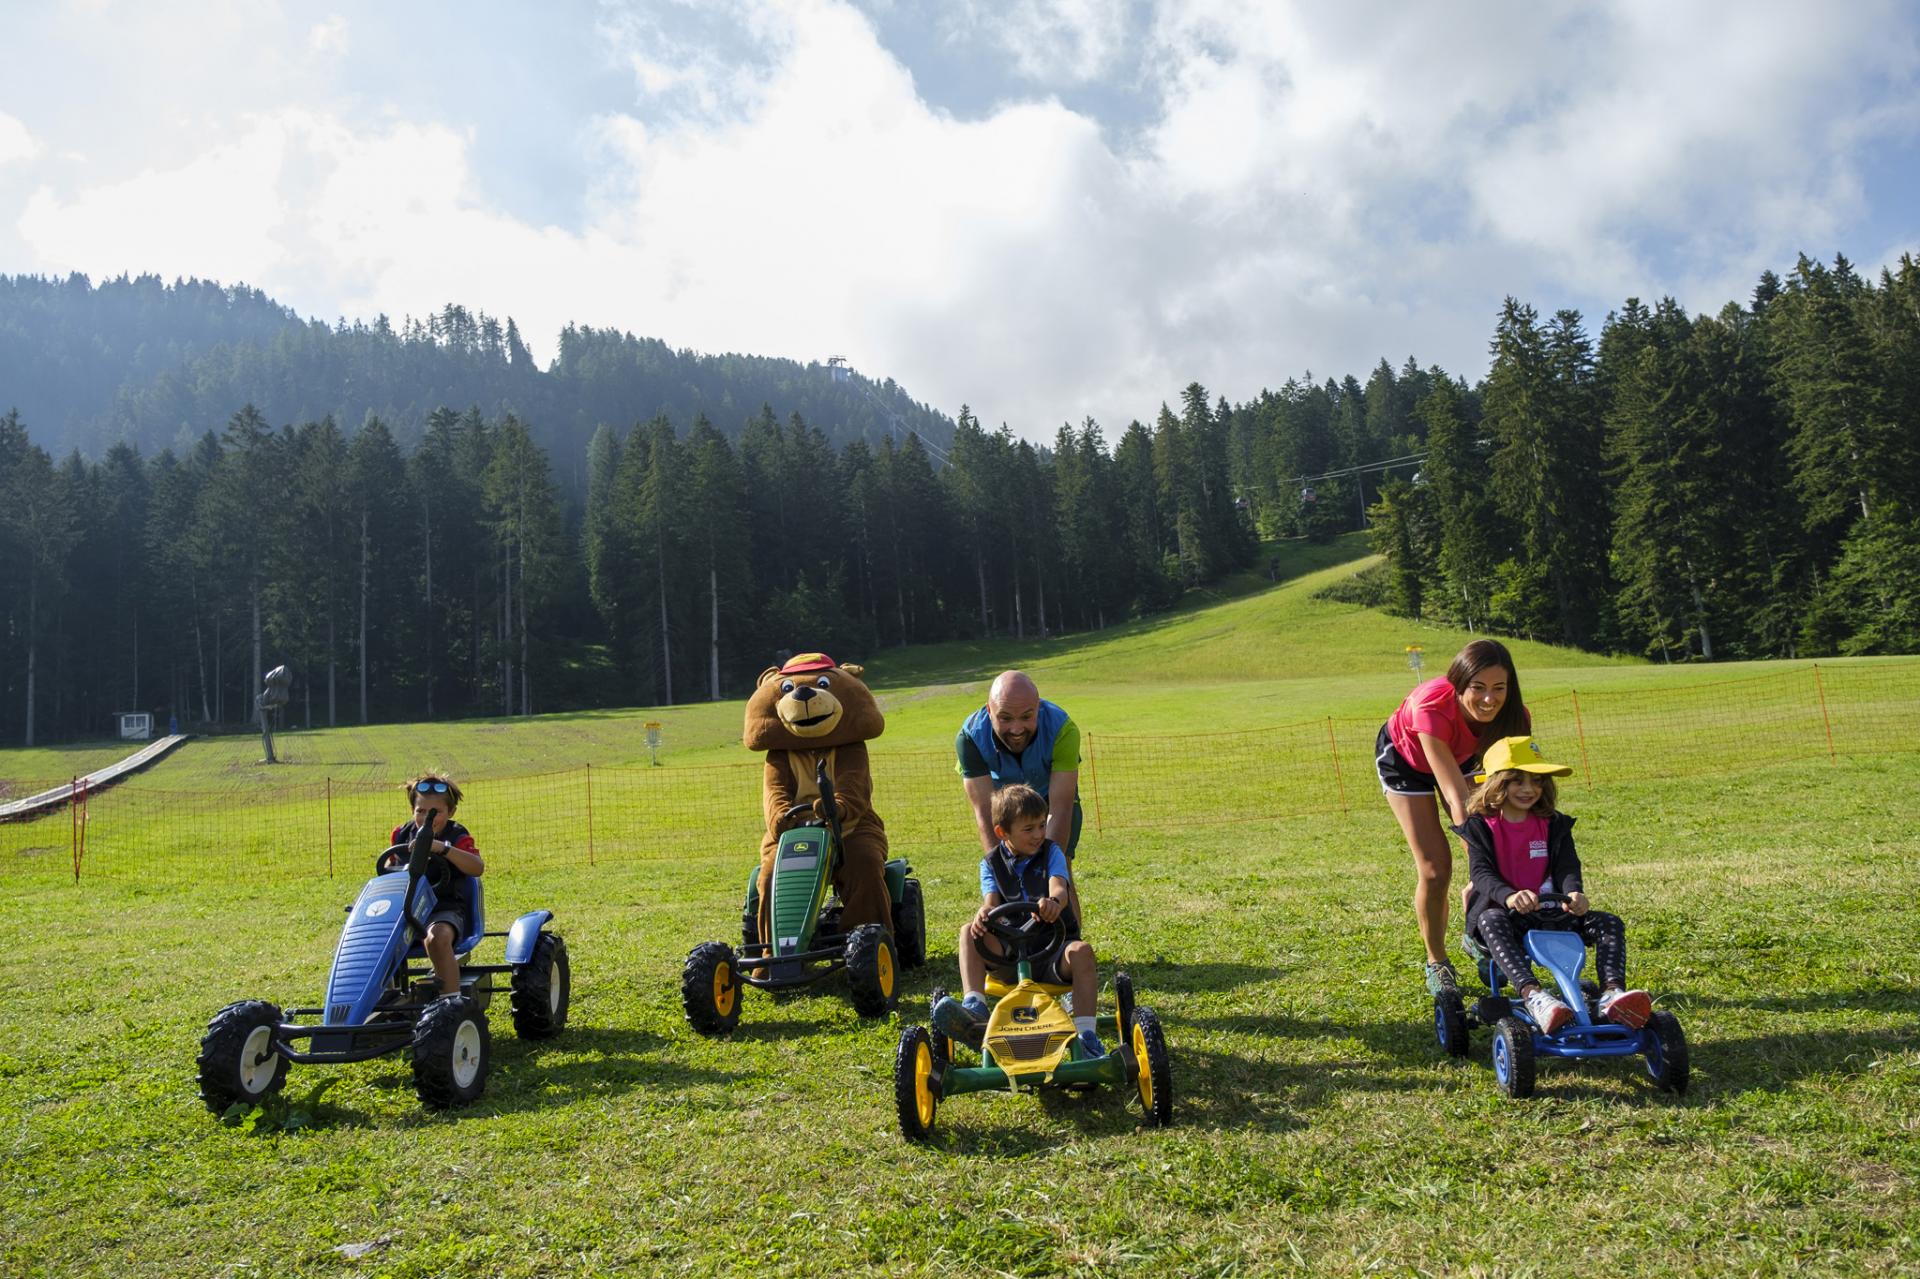 BEGINNING JUNE IN THE DOLOMITES - Breathe in the crisp Dolomite air amid endless games